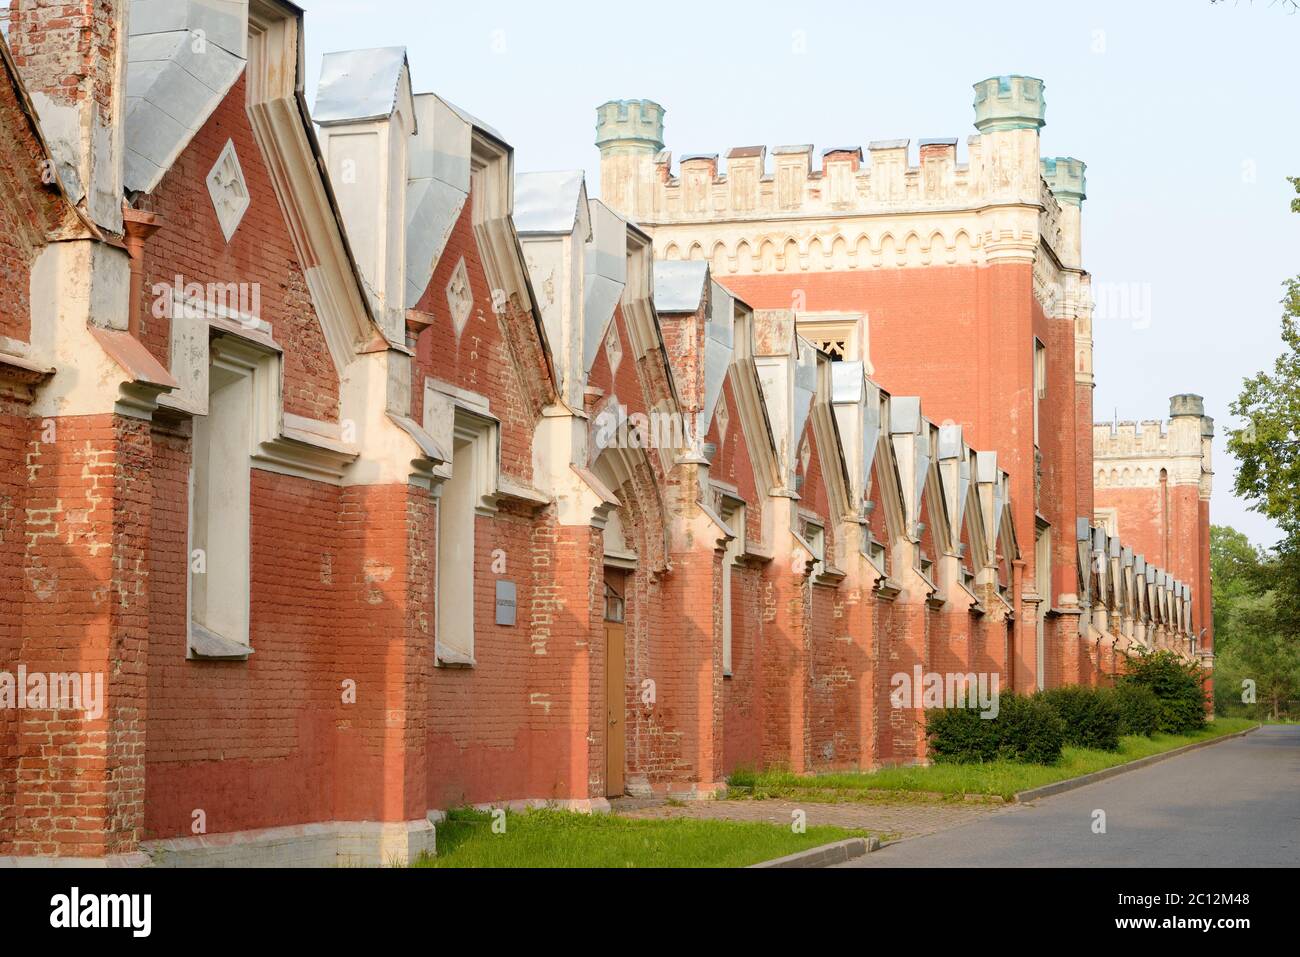 Imperial stables in Petergof. Stock Photo